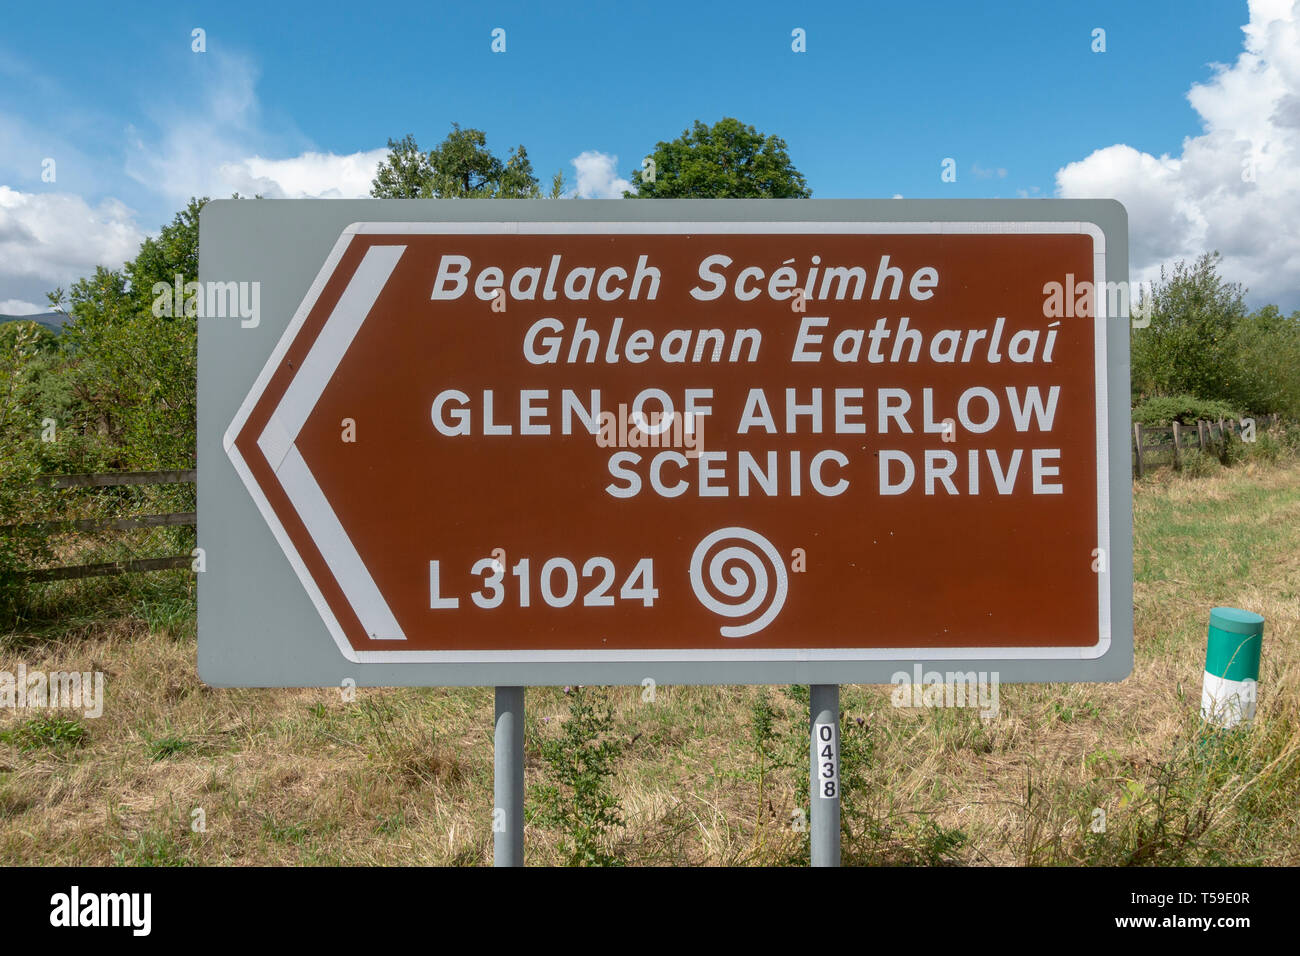 Road sign for the scenic drive along the Glen of Aherlow, County Tipperary, Ireland. Stock Photo